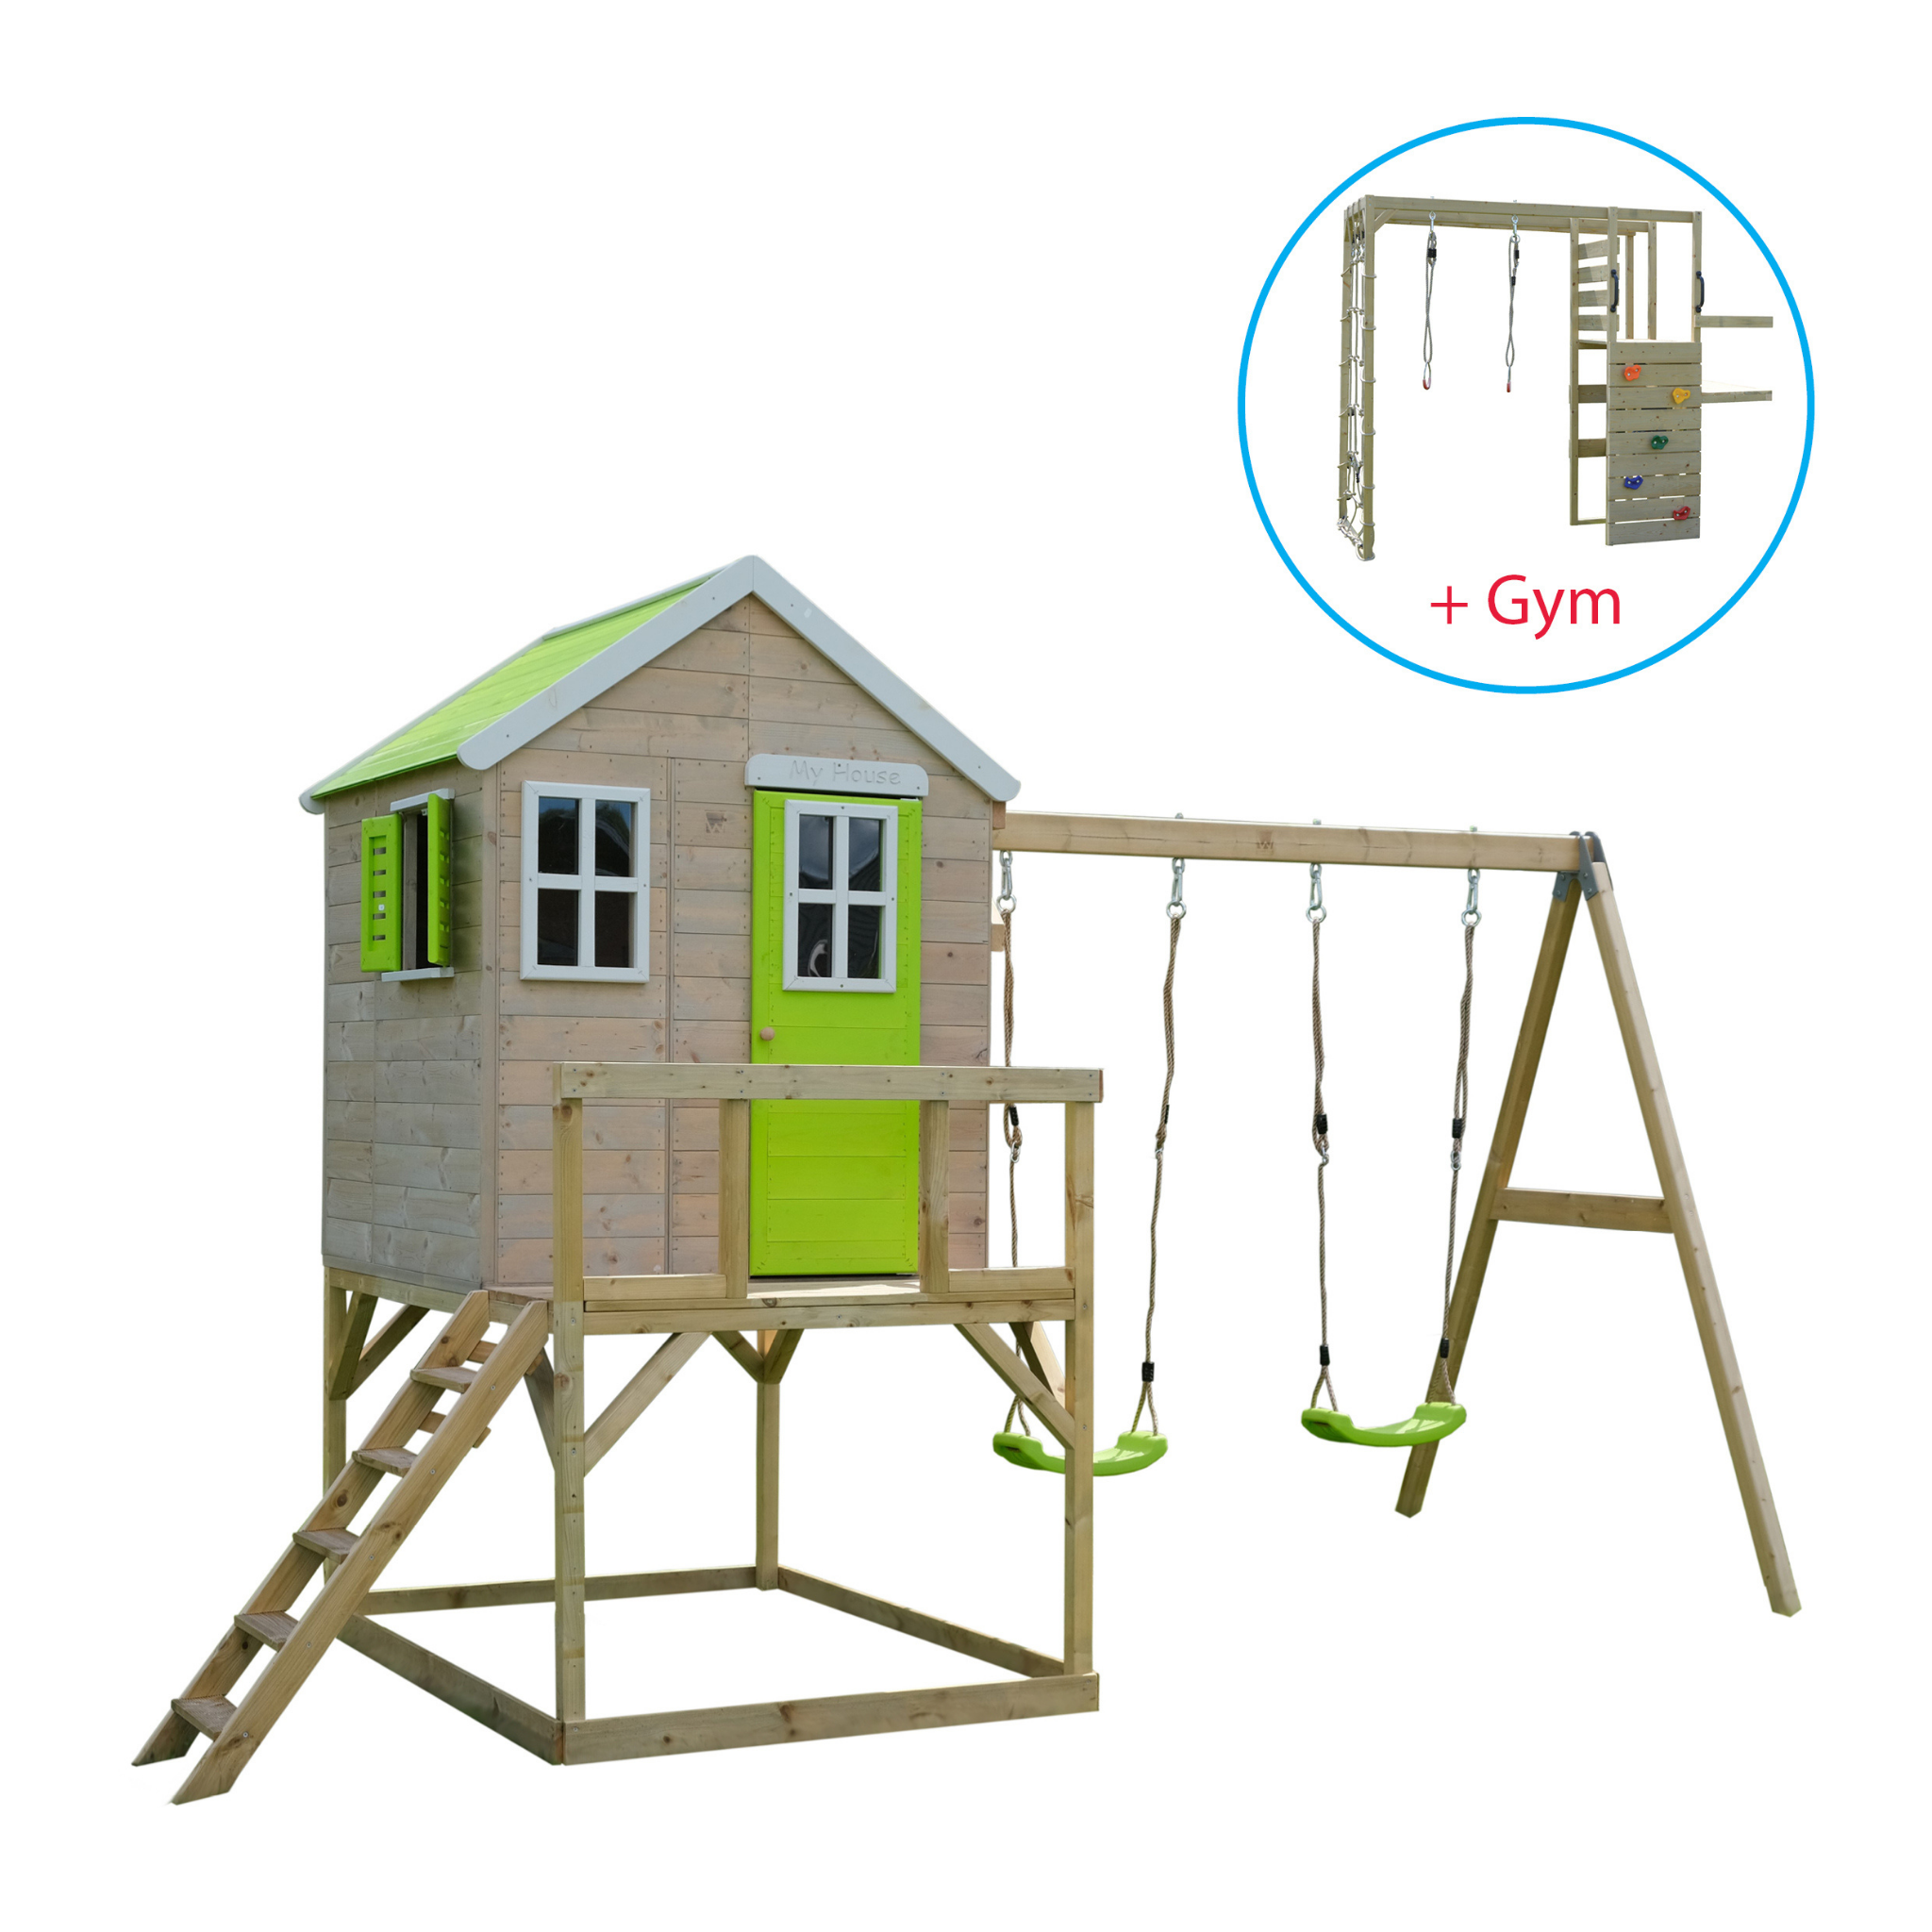 M27-G My Lodge with Platform and Double Swing + Gym